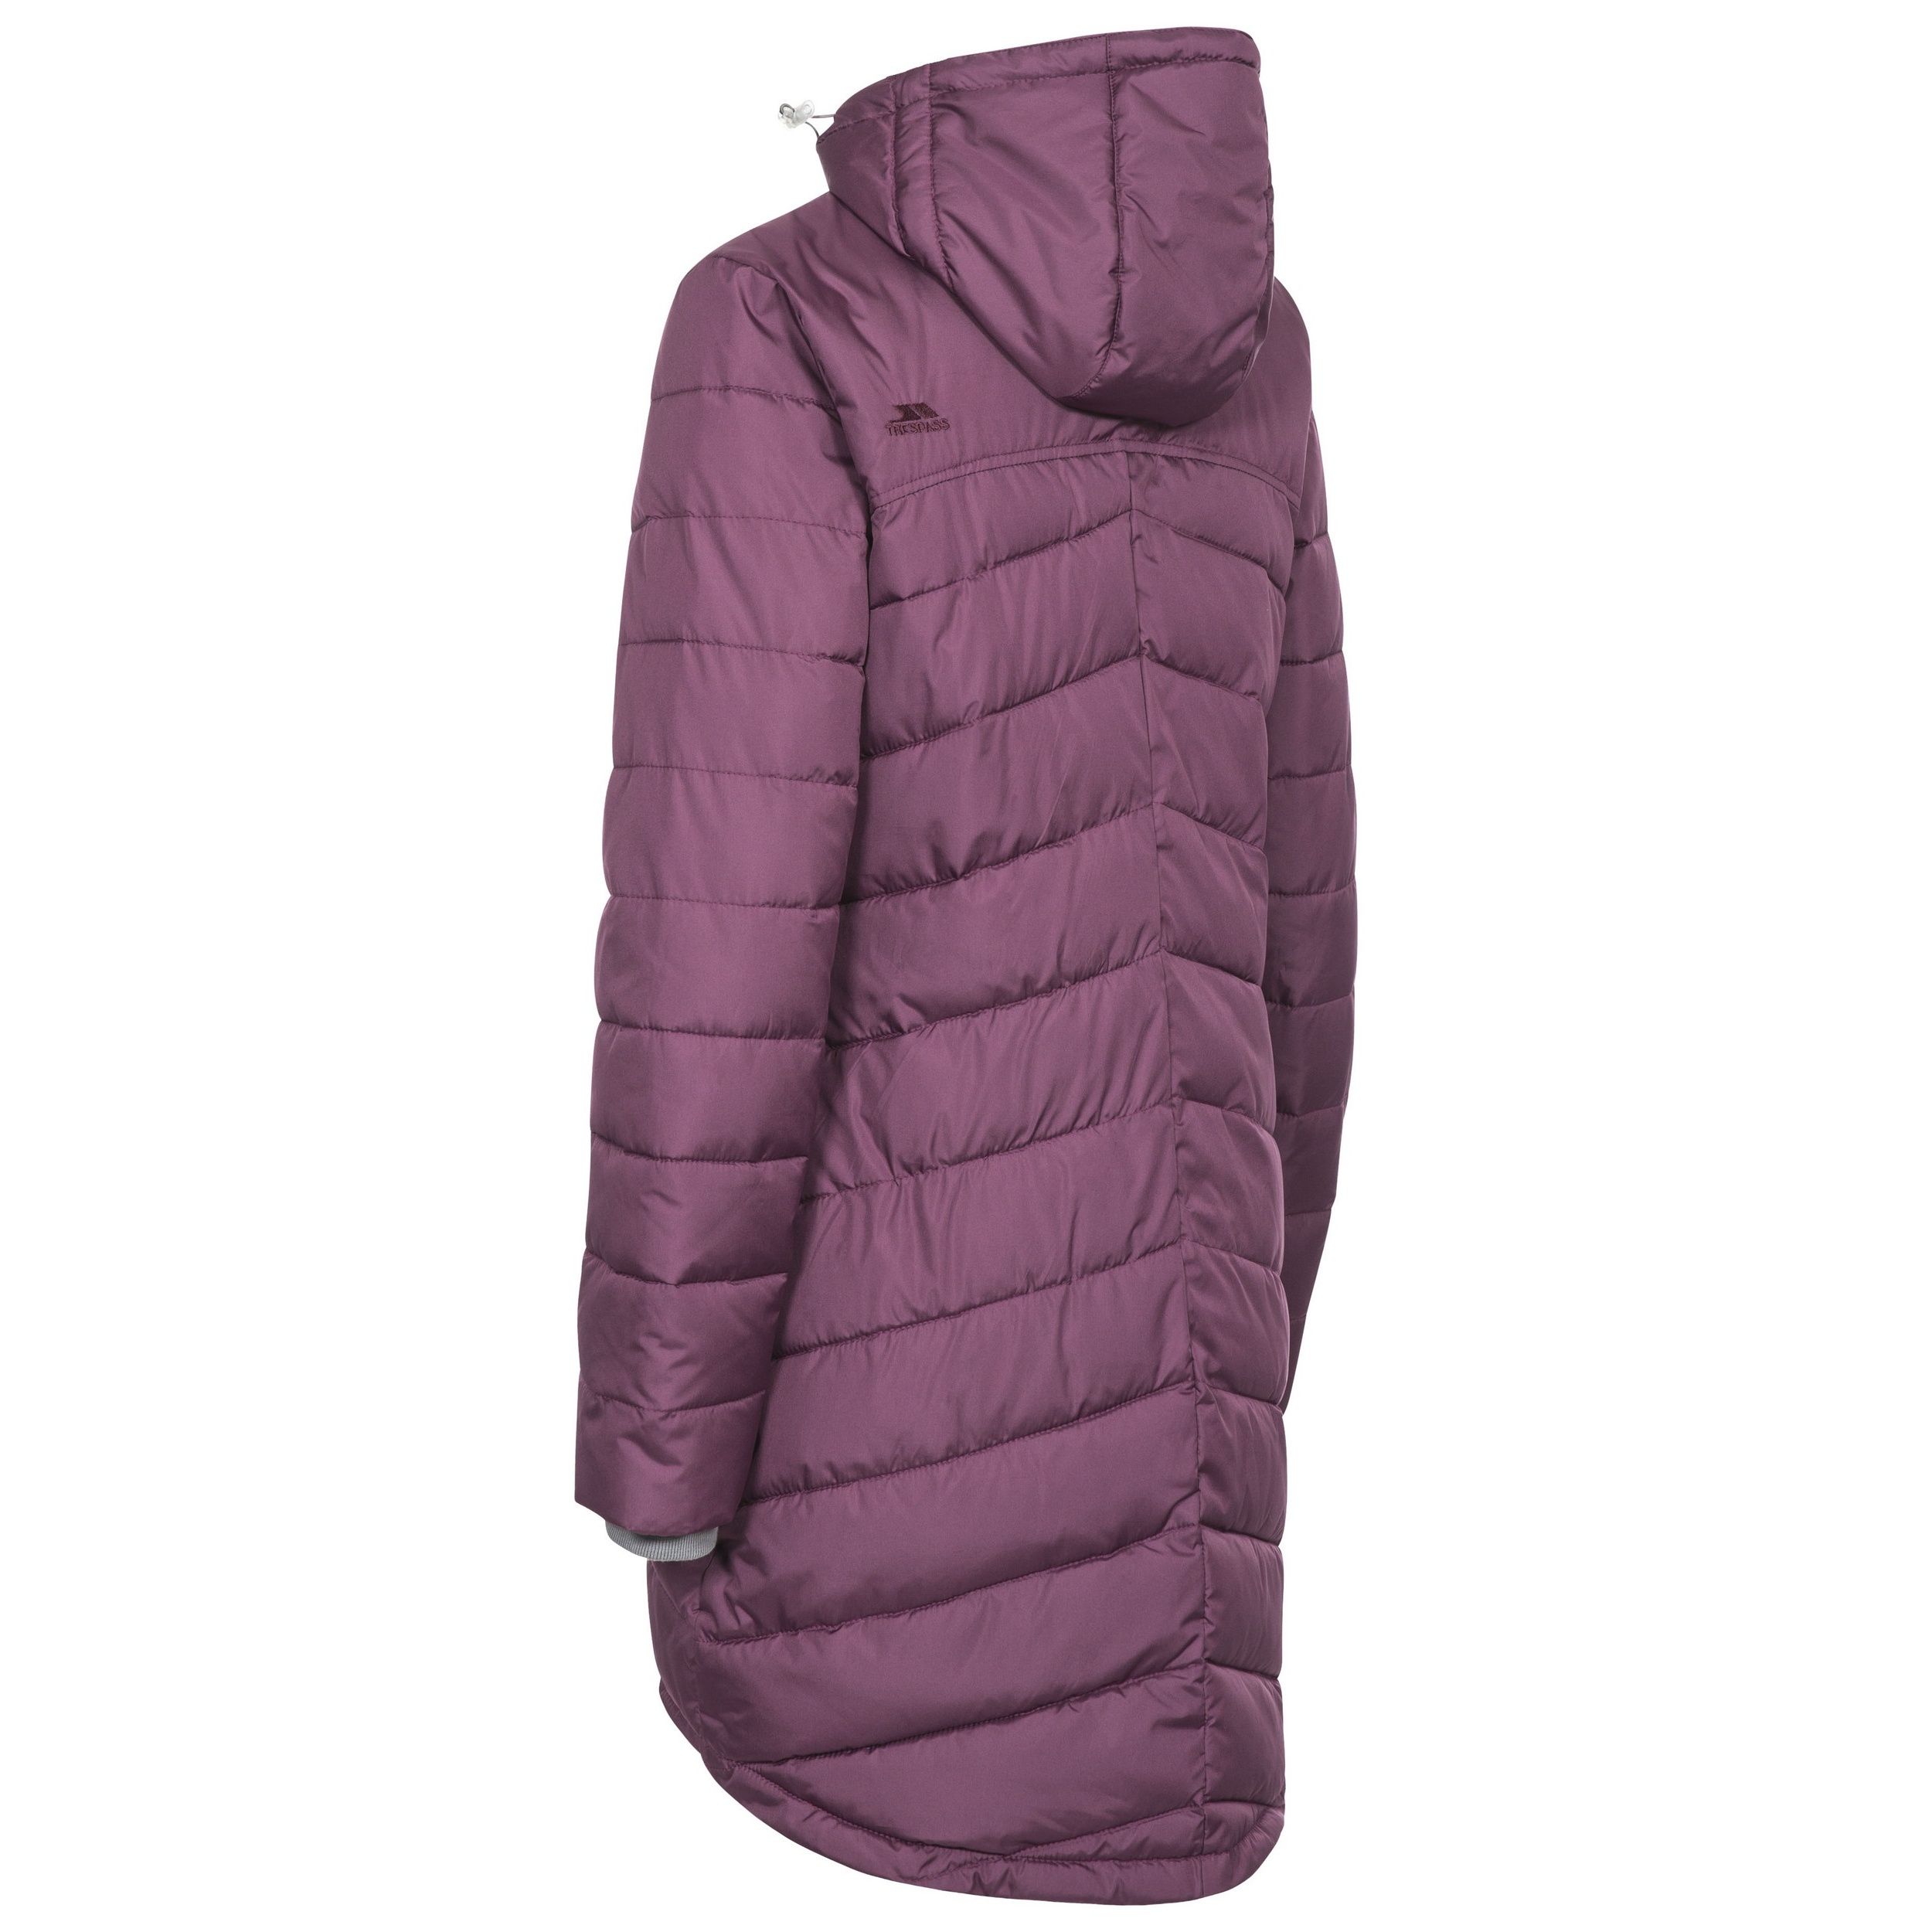 Adjustable zip off hood. Tricot lined collar. Knitted inner cuff. 2 double entry pockets. Tricot lined pocket bags. Shell: 100% Polyester, Lining: 100% Polyester, Filling: 100% Polyester. Trespass Womens Chest Sizing (approx): XS/8 - 32in/81cm, S/10 - 34in/86cm, M/12 - 36in/91.4cm, L/14 - 38in/96.5cm, XL/16 - 40in/101.5cm, XXL/18 - 42in/106.5cm.